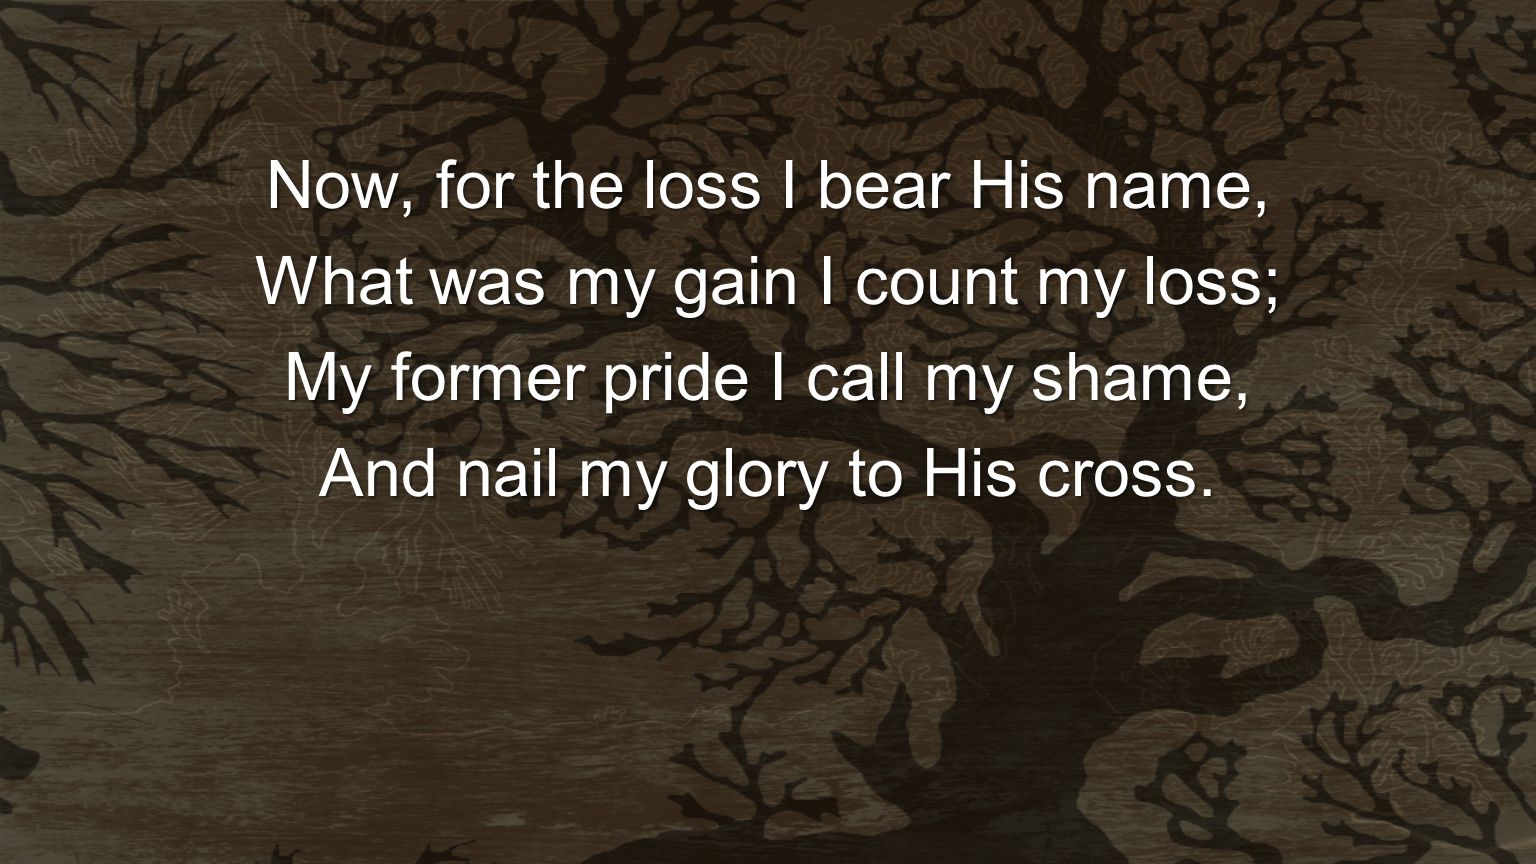 Now, for the loss I bear His name, What was my gain I count my loss;